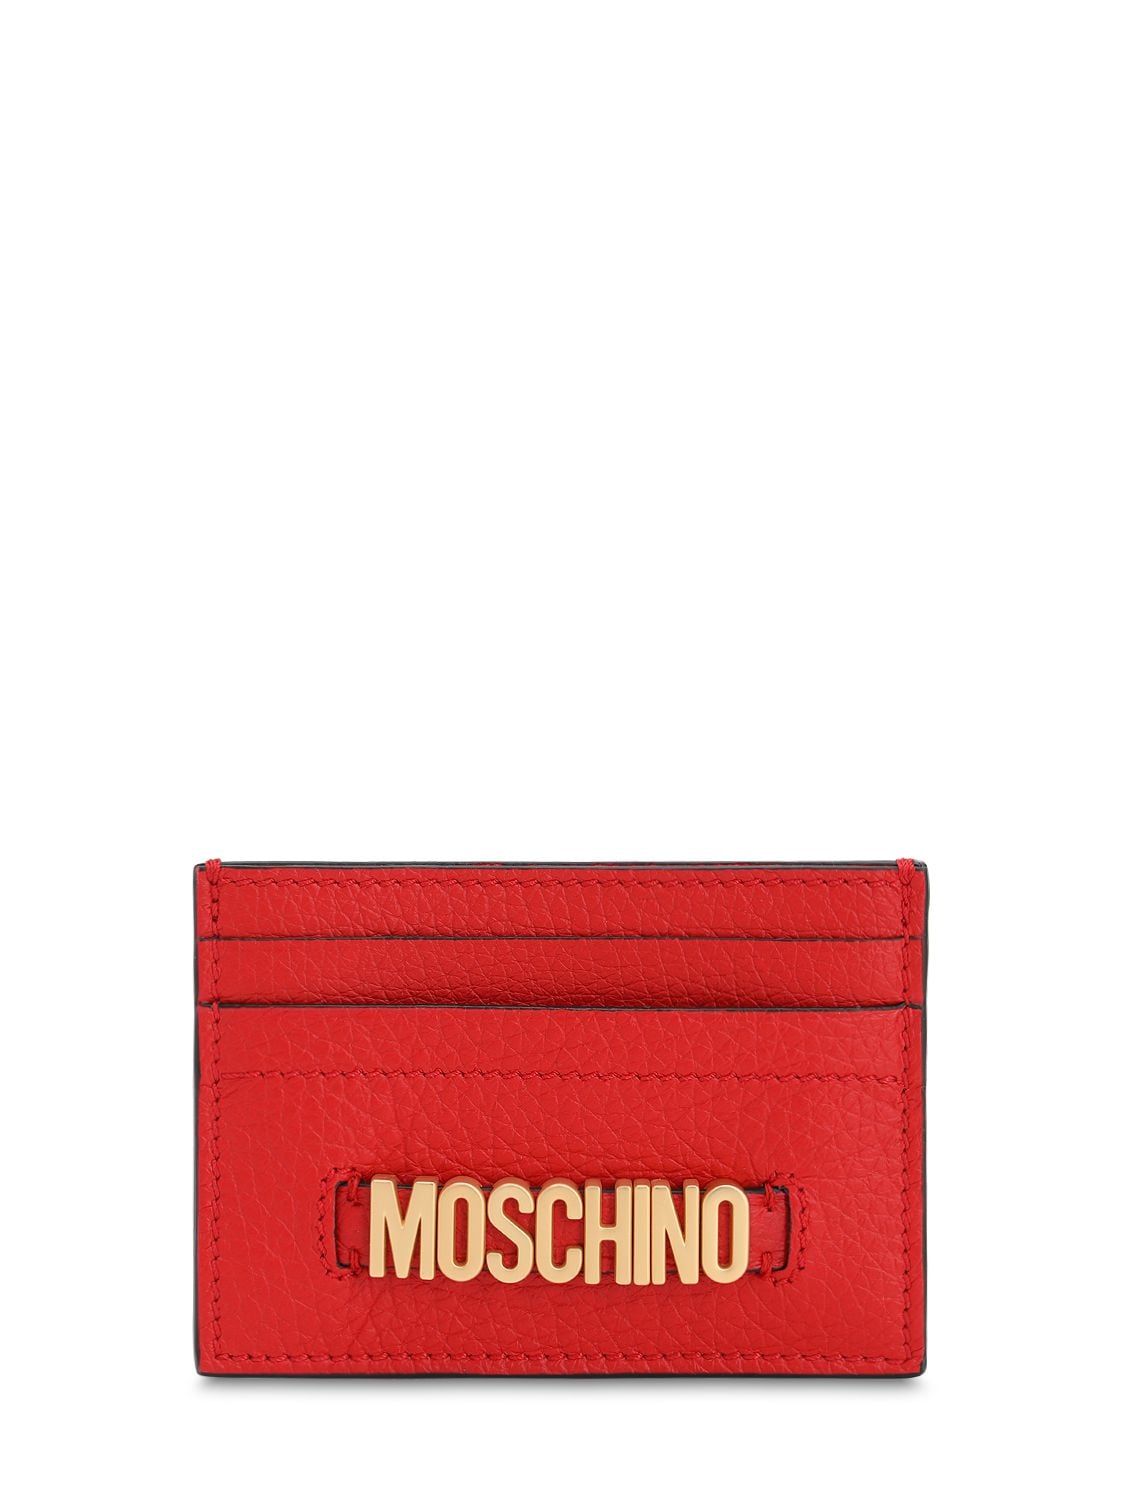 MOSCHINO LETTERED LOGO LEATHER CARD HOLDER,71IL0M033-QTAXMTI1